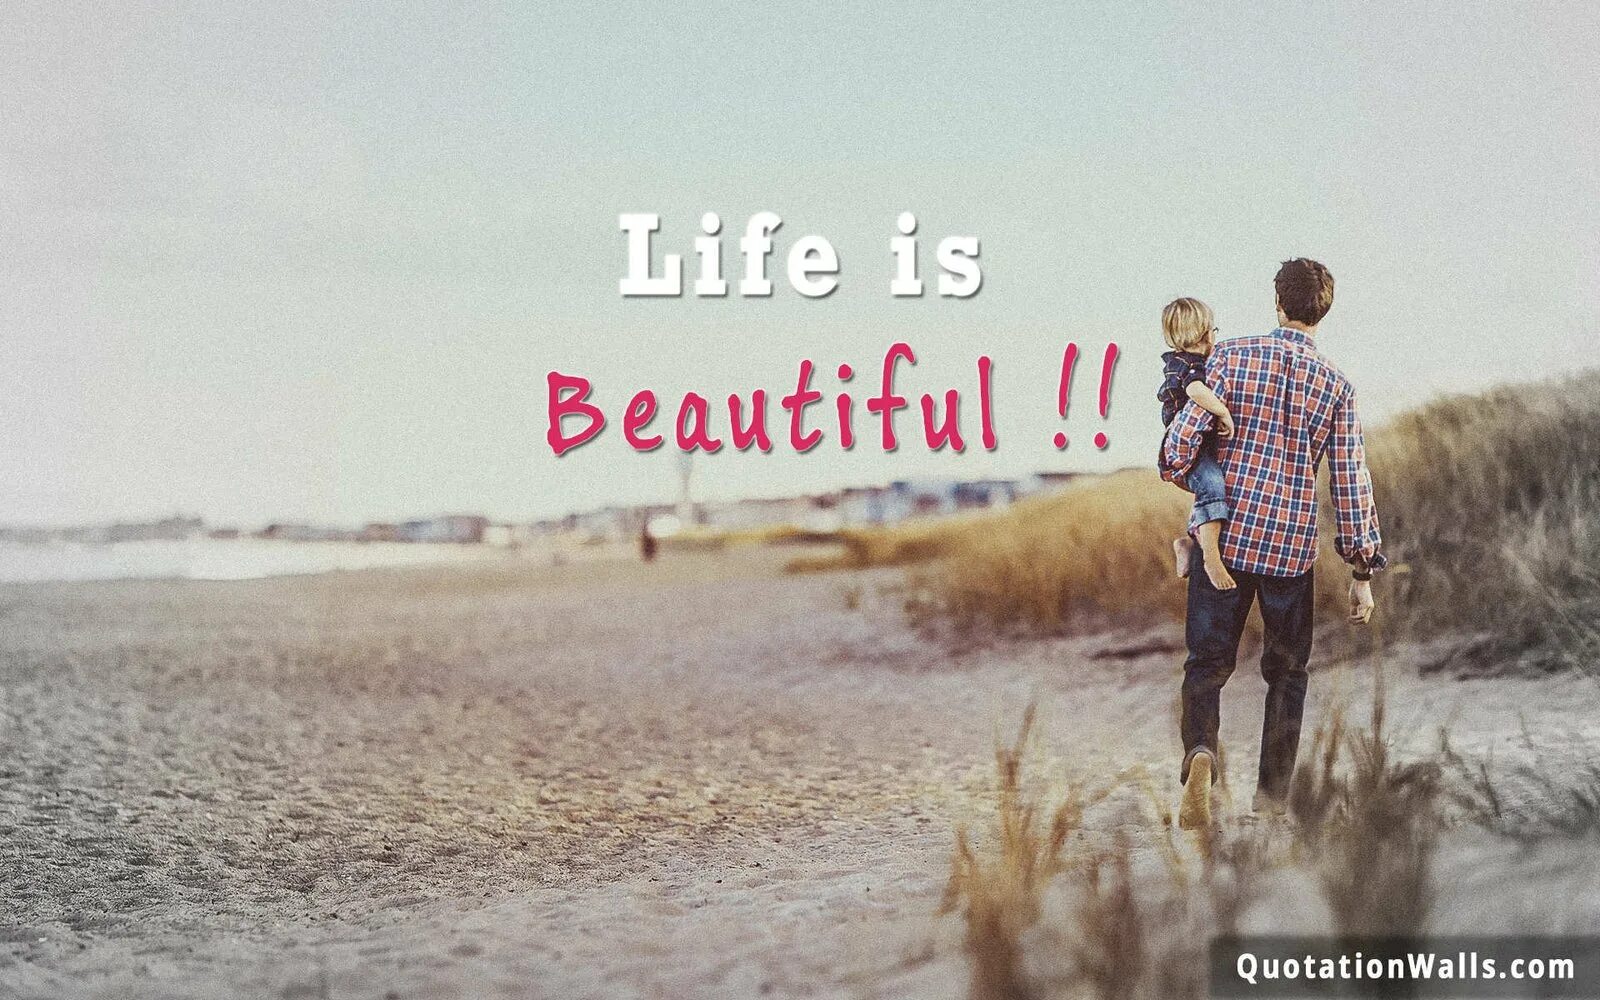 Life is beautiful. Life is beautiful картинки. Life is beautiful обои. Обои на телефон Life is beautiful. It is the beautiful town